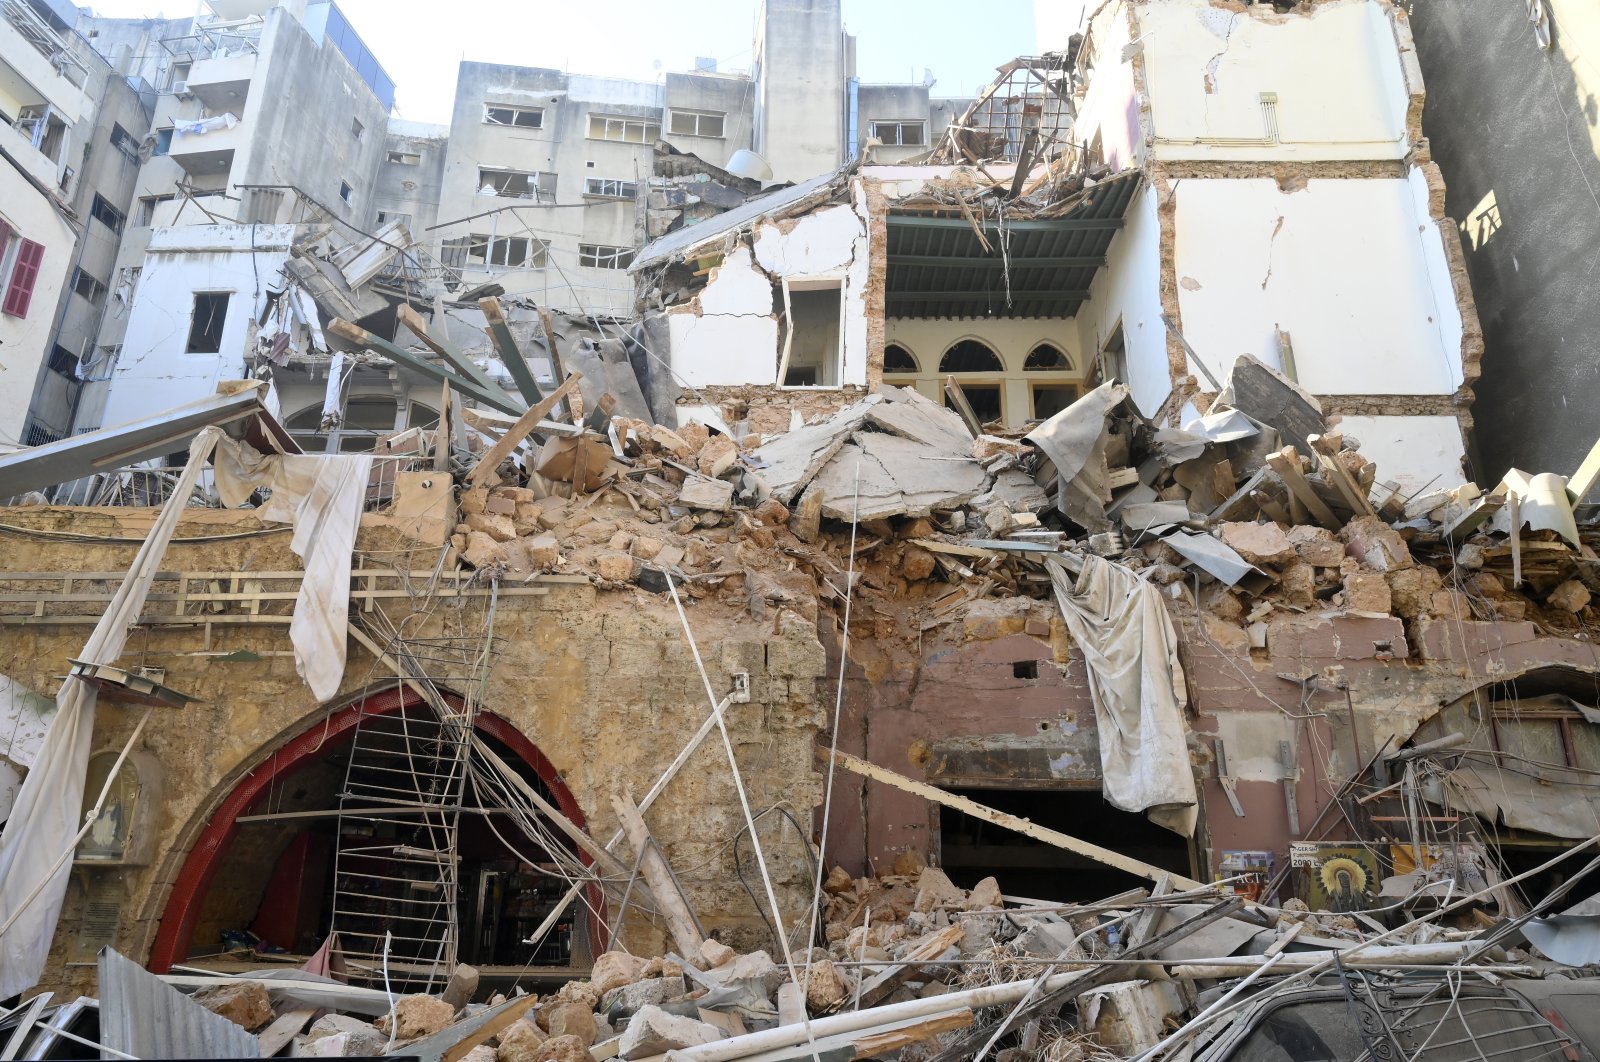 A damaged building in the aftermath of a massive explosion in Beirut, Lebanon, Aug. 5, 2020. (EPA Photo)